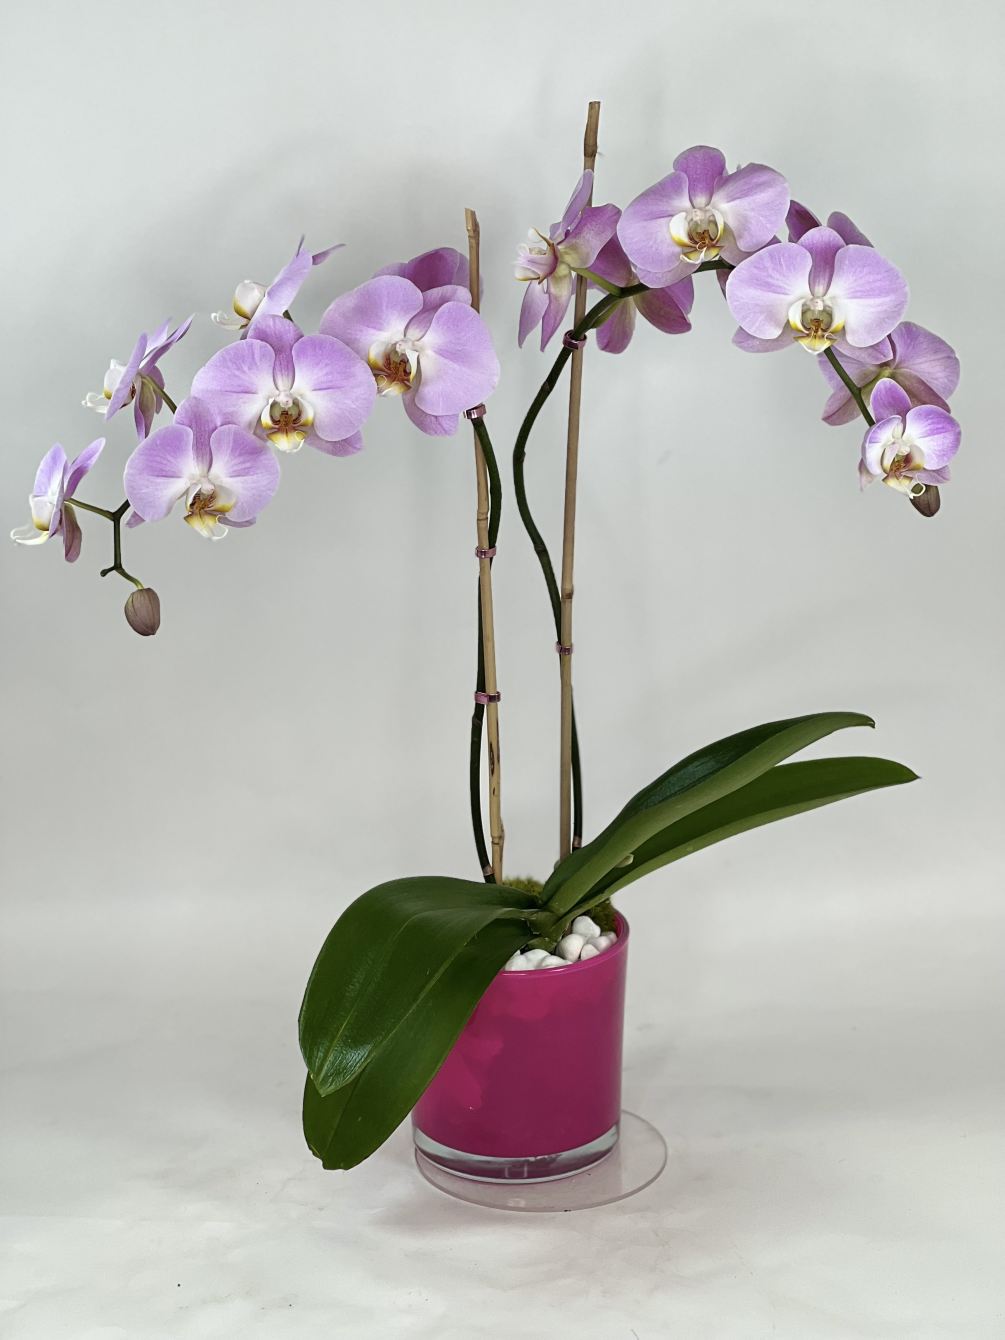 A double blooming phalaenopsis pink orchid in a pink ceramic container is